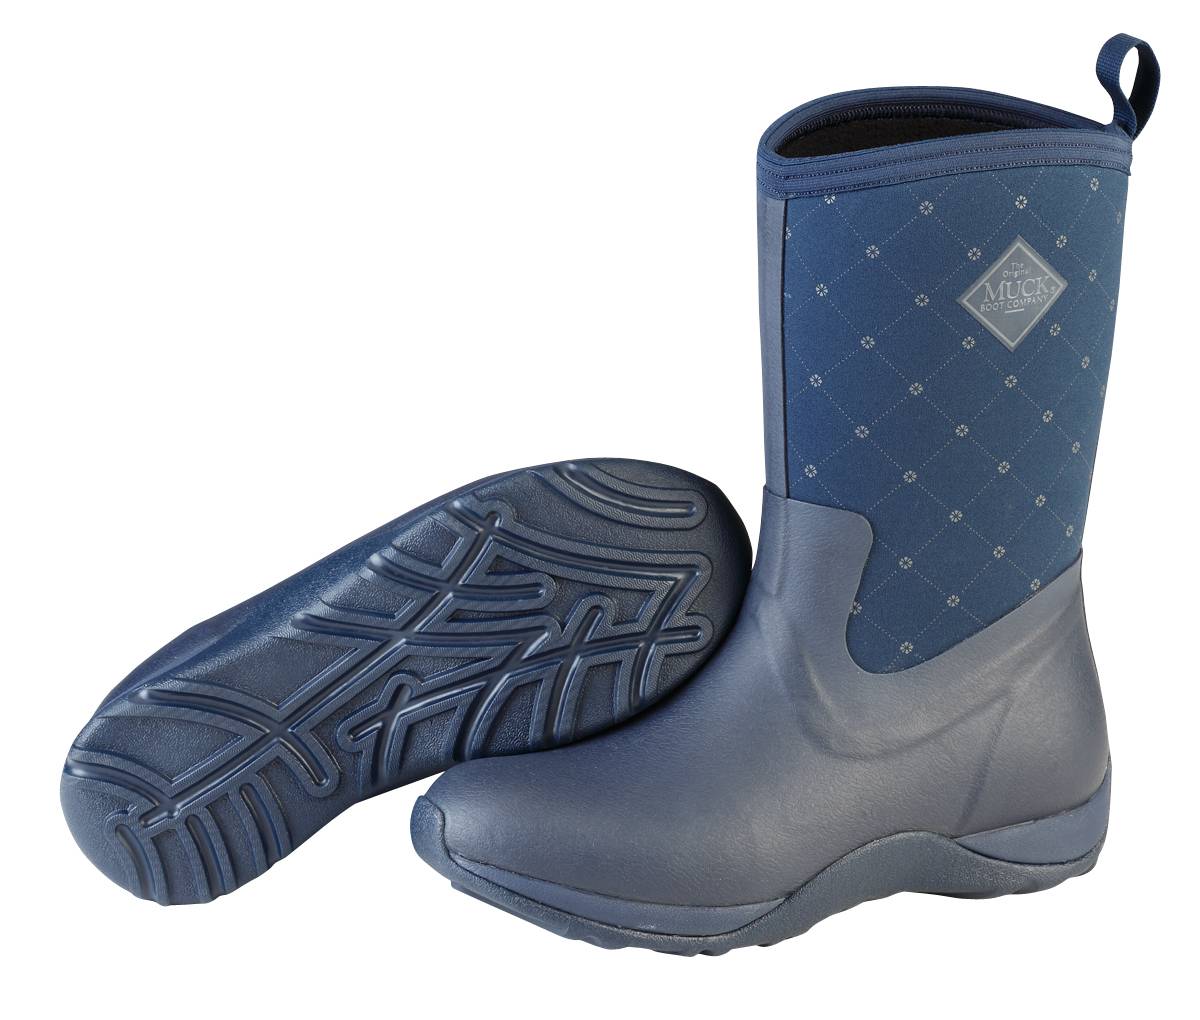 Muck Boots Arctic Weekend Mid-Height Boots - Ladies - Navy Quilt